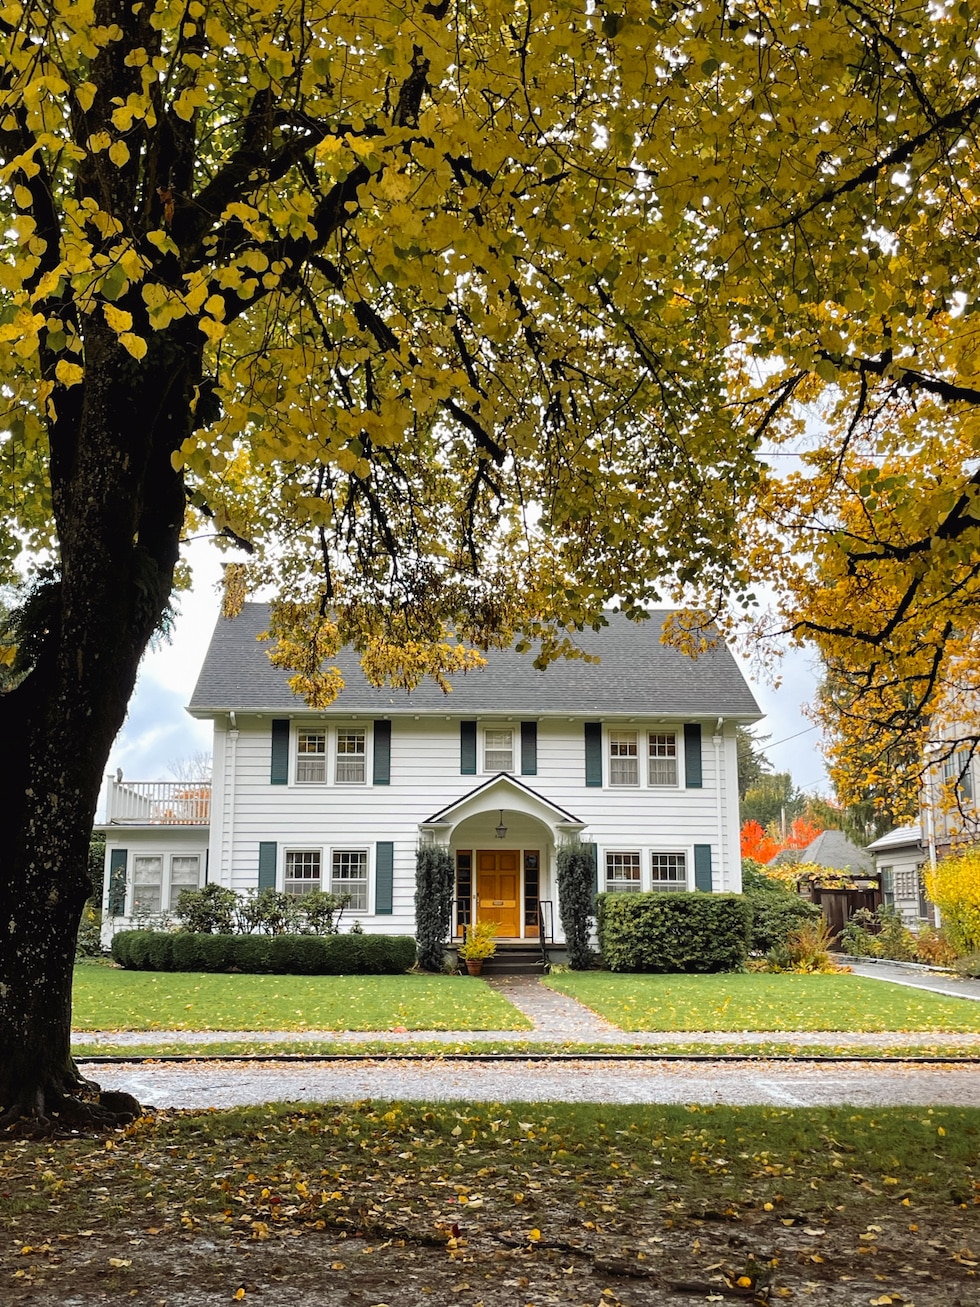 Charming Homes in Autumn (two of our family's past homes in Portland!)